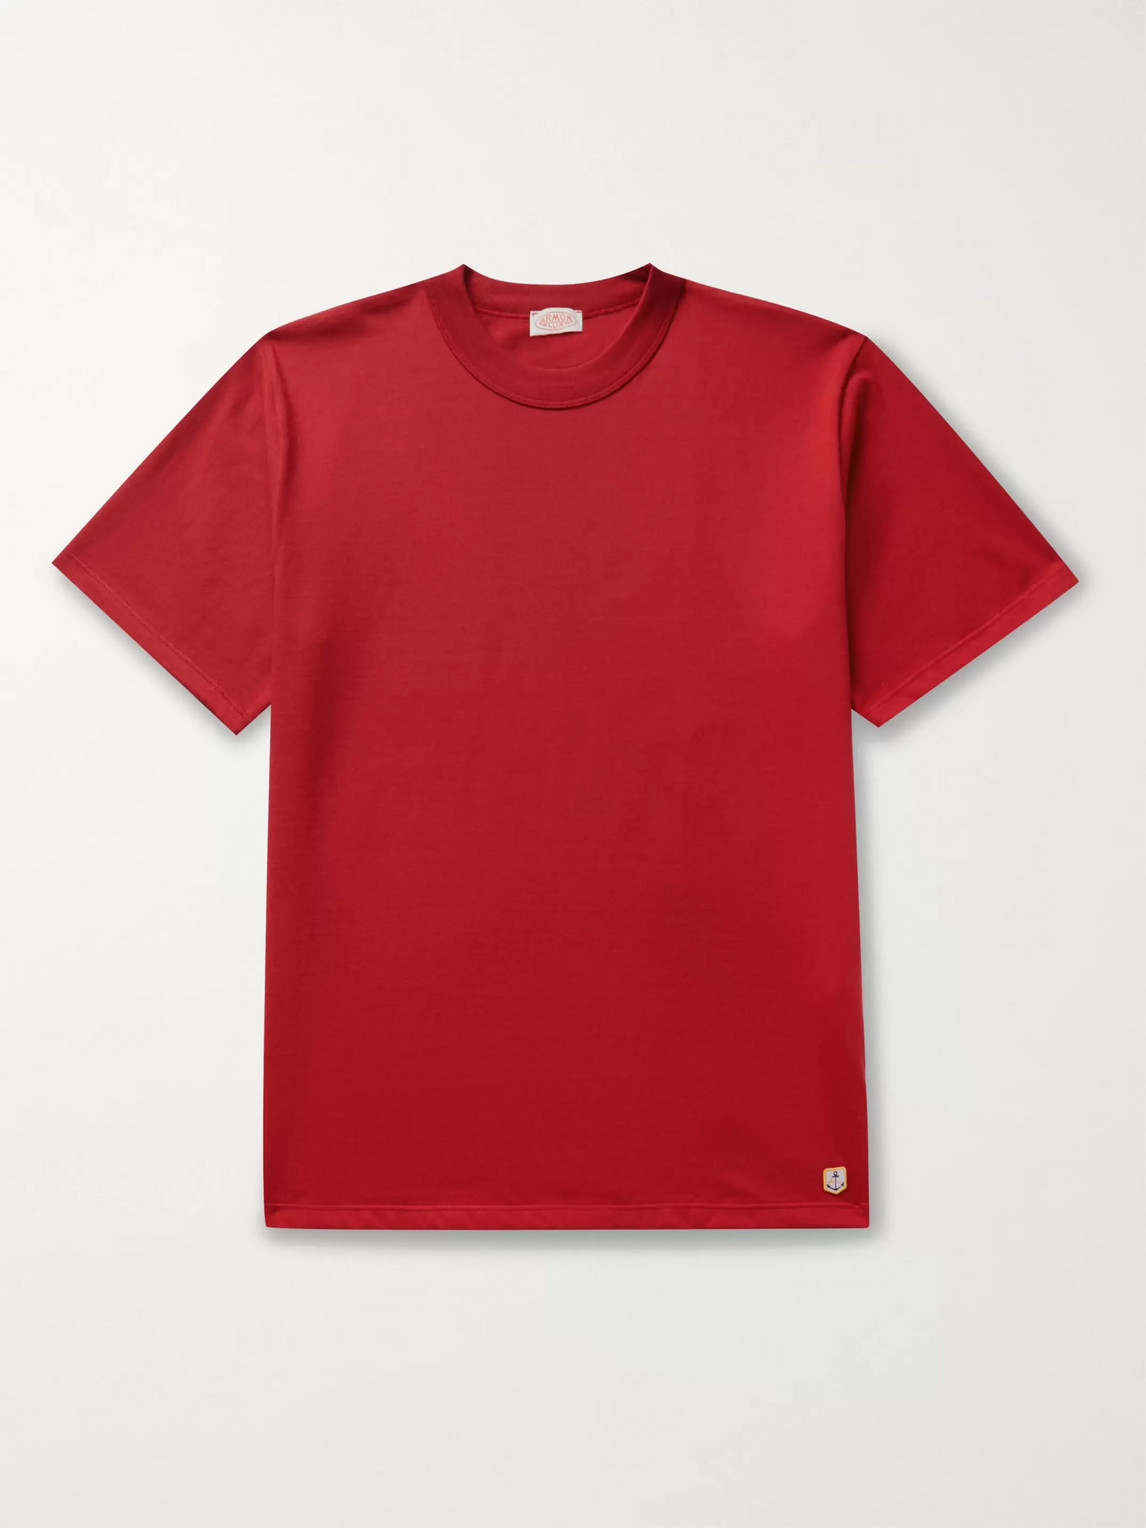 Armor-lux Cotton-jersey T-shirt In Red